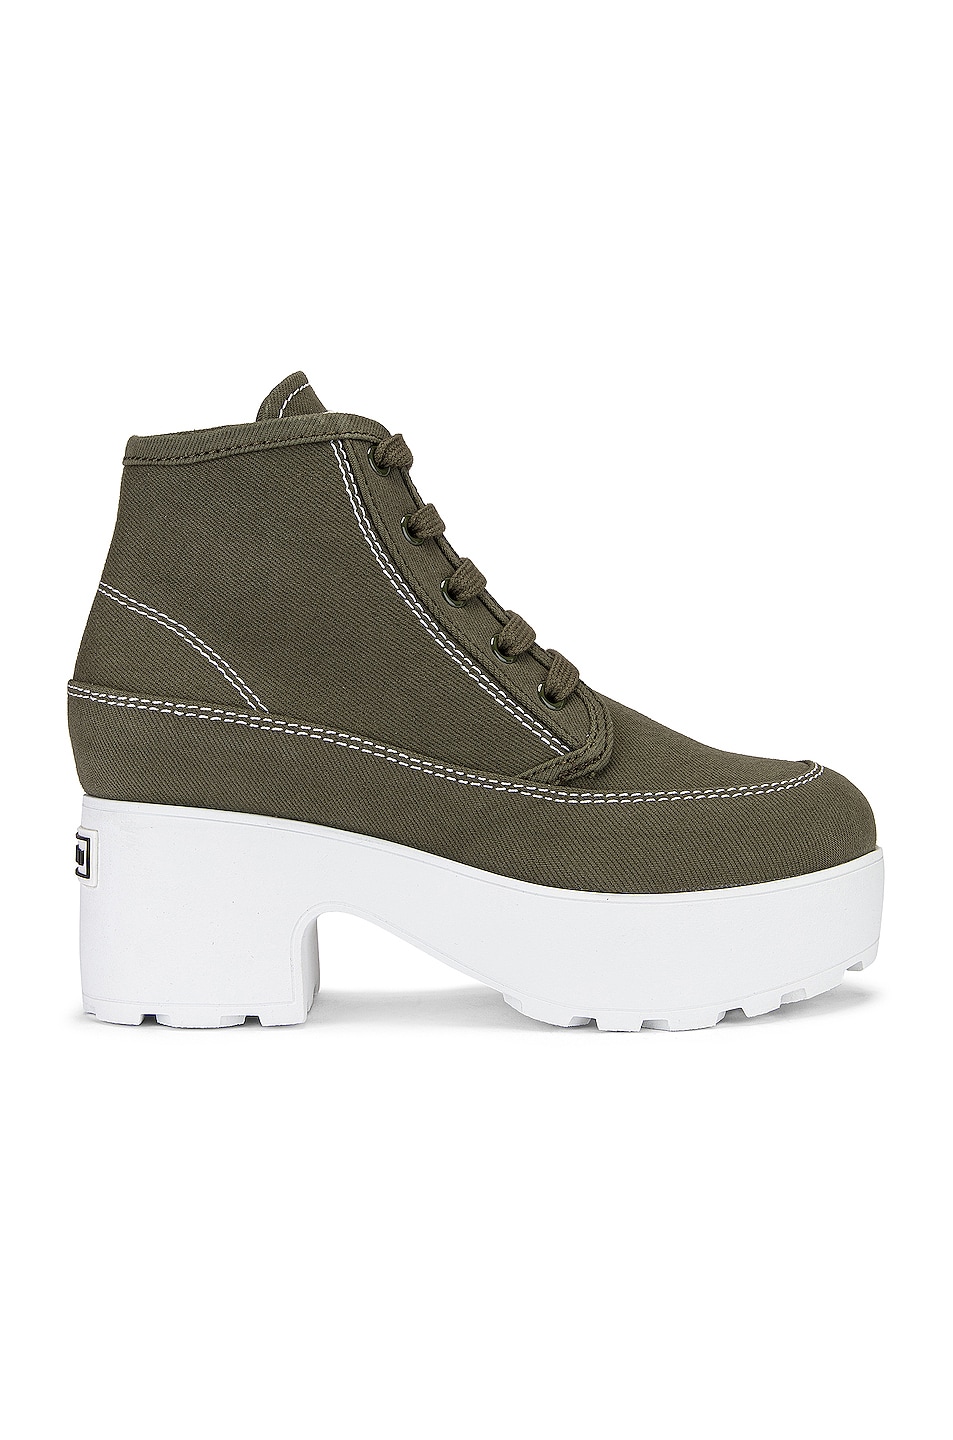 Image 1 of Miu Miu Platform Ankle Boots in Military & White